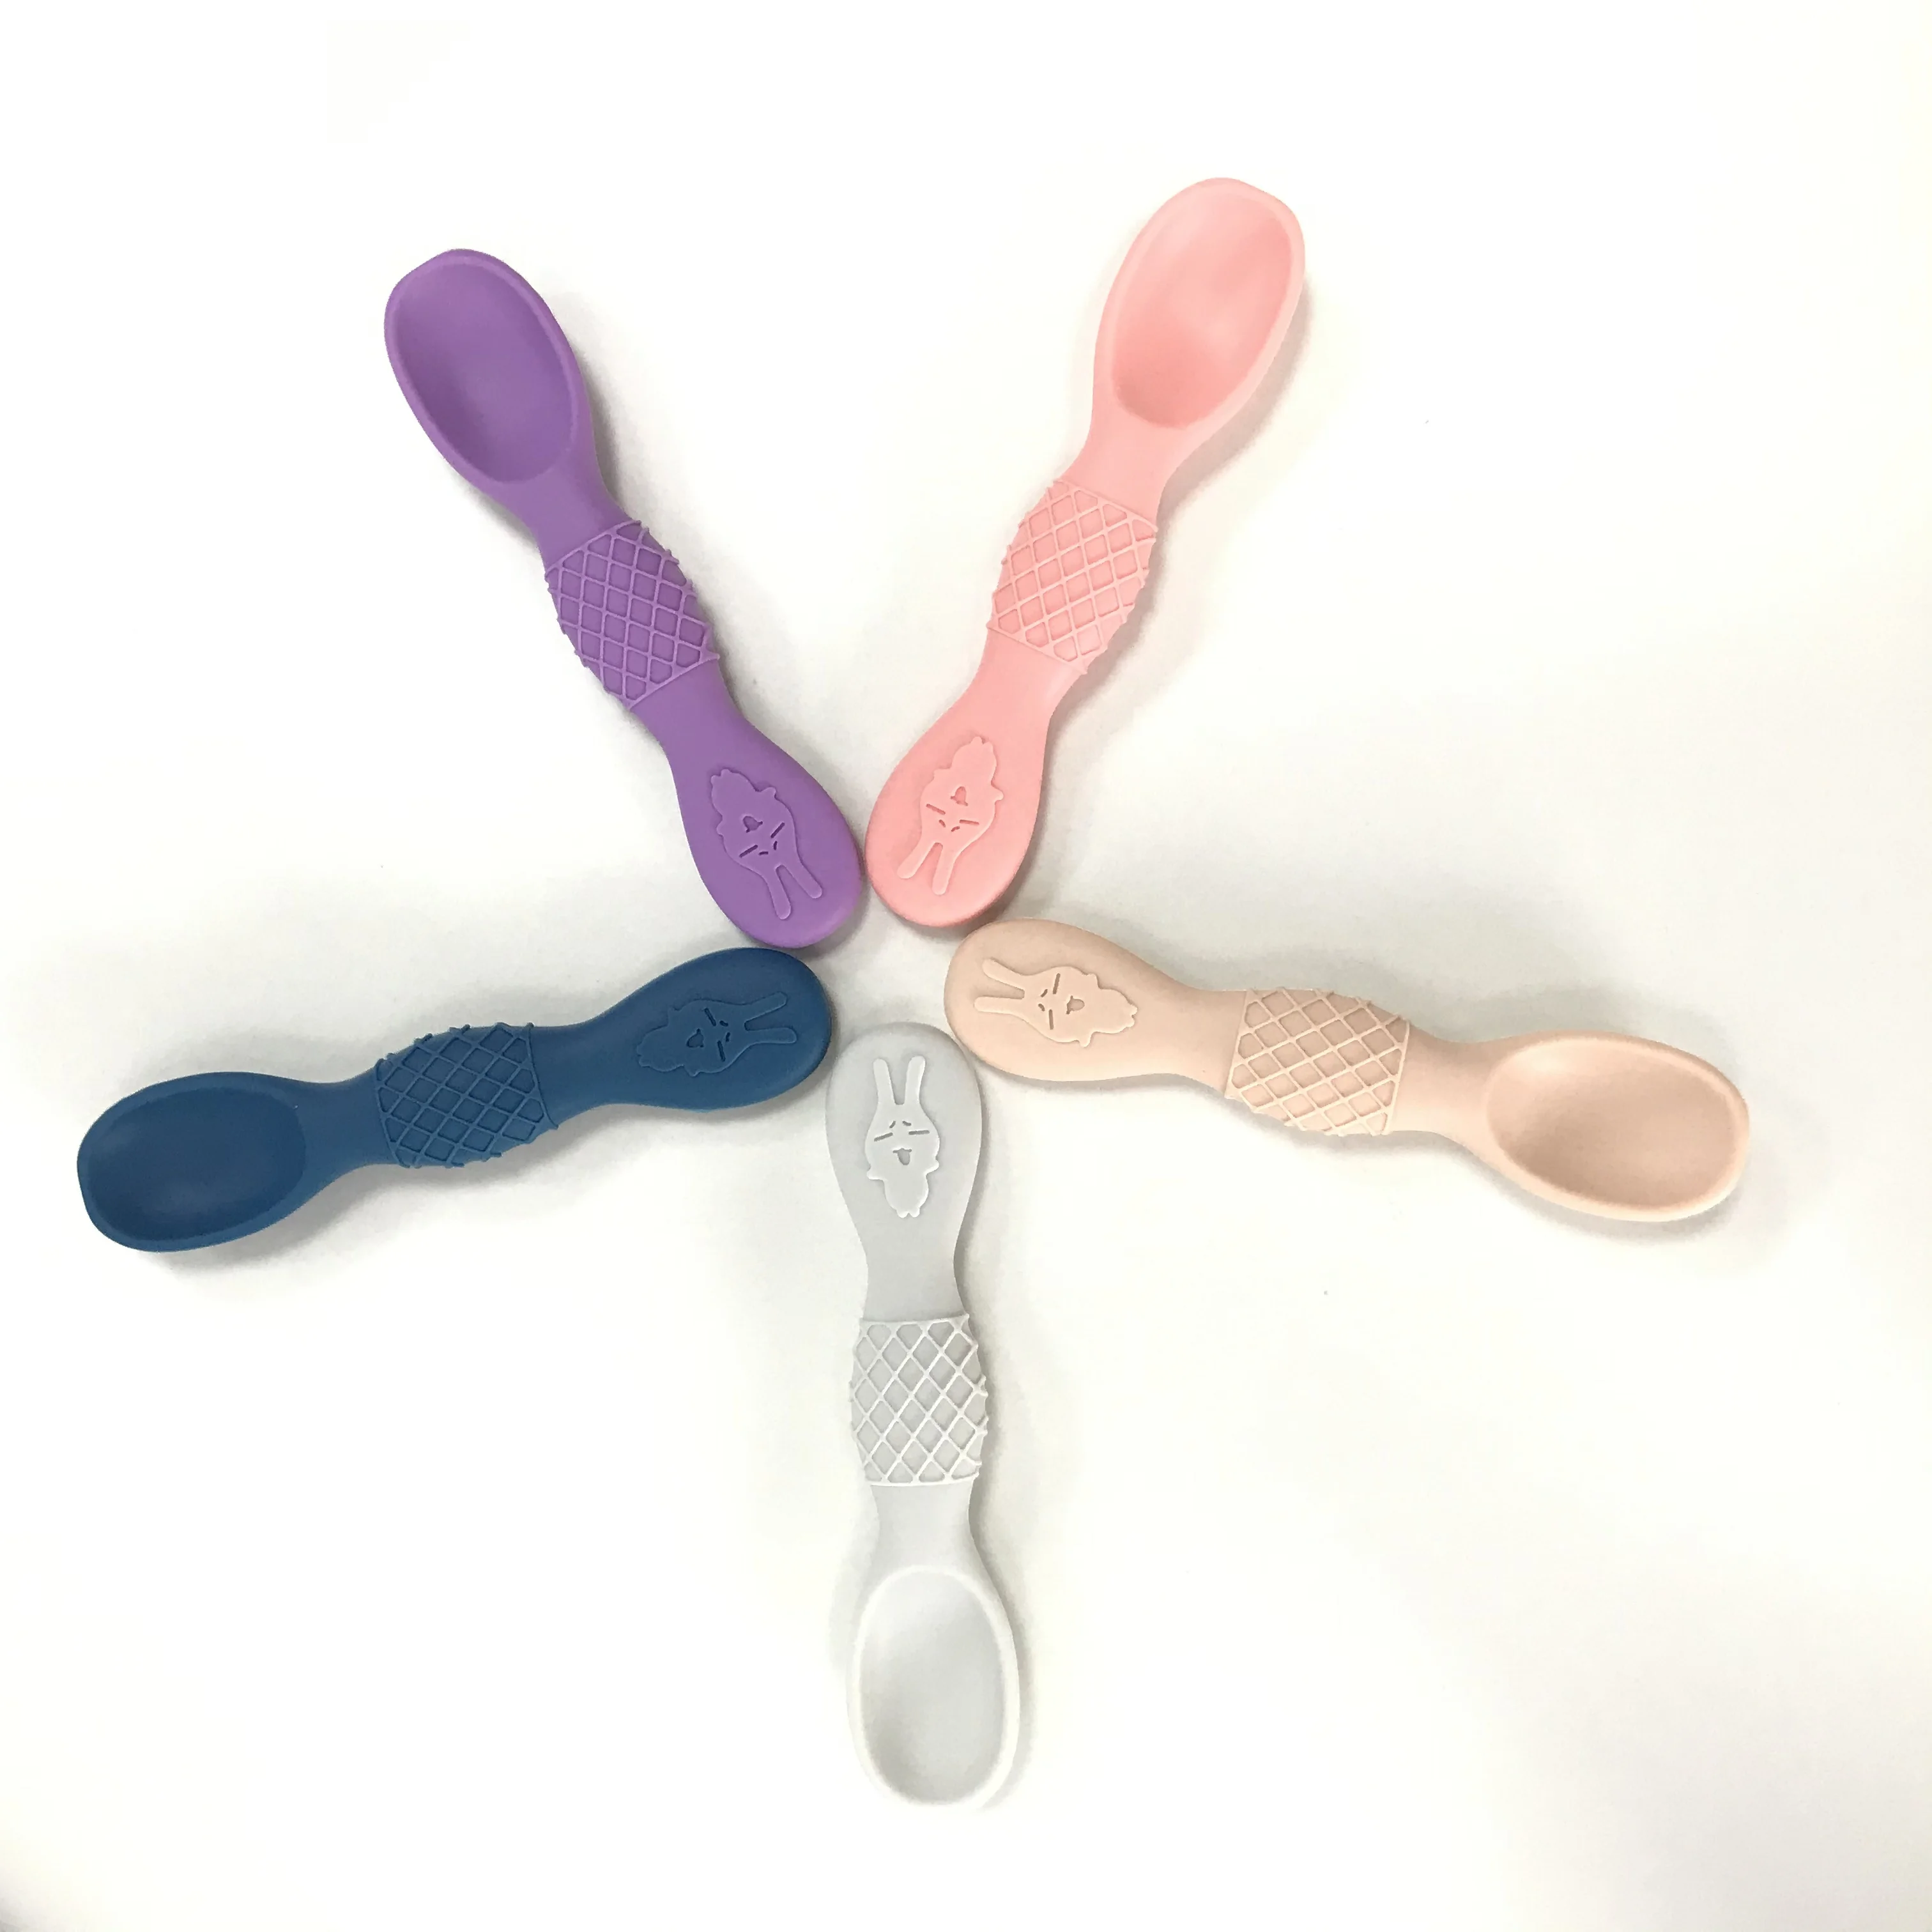 Bpa Free Silicone Baby Spoon,Teething Spoon Toy - Buy Bpa Free Silicone  Baby Spoon Teething Spoon Toy,Teething Spoon Toy,Bpa Free Silicone Baby  Spoon Product on Alibaba.com